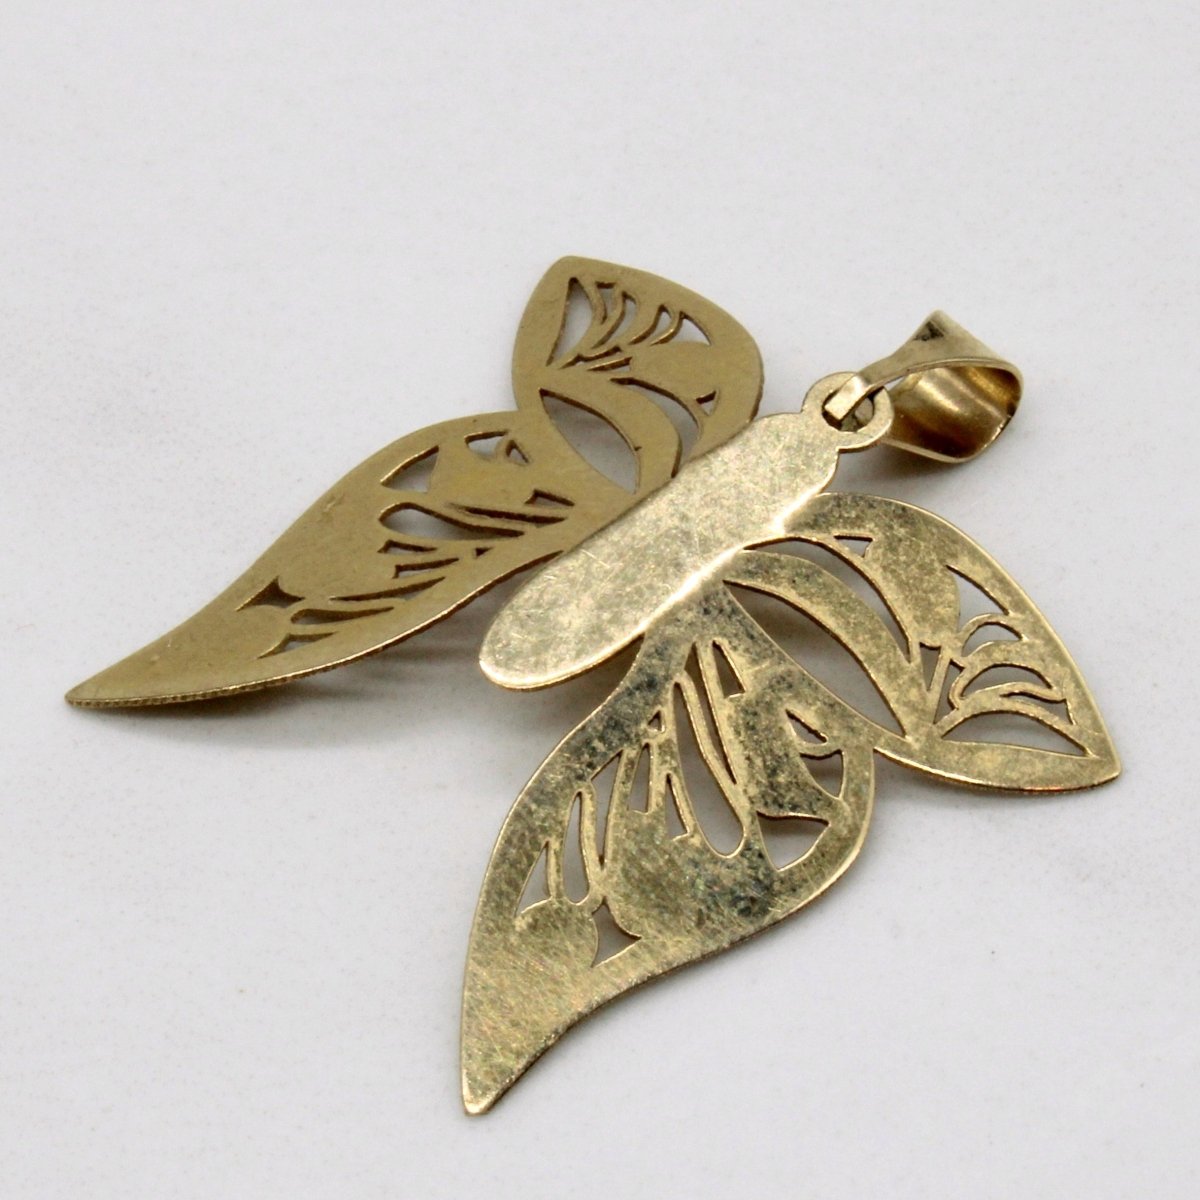 10k Yellow Gold Butterfly Pendant - 100 Ways